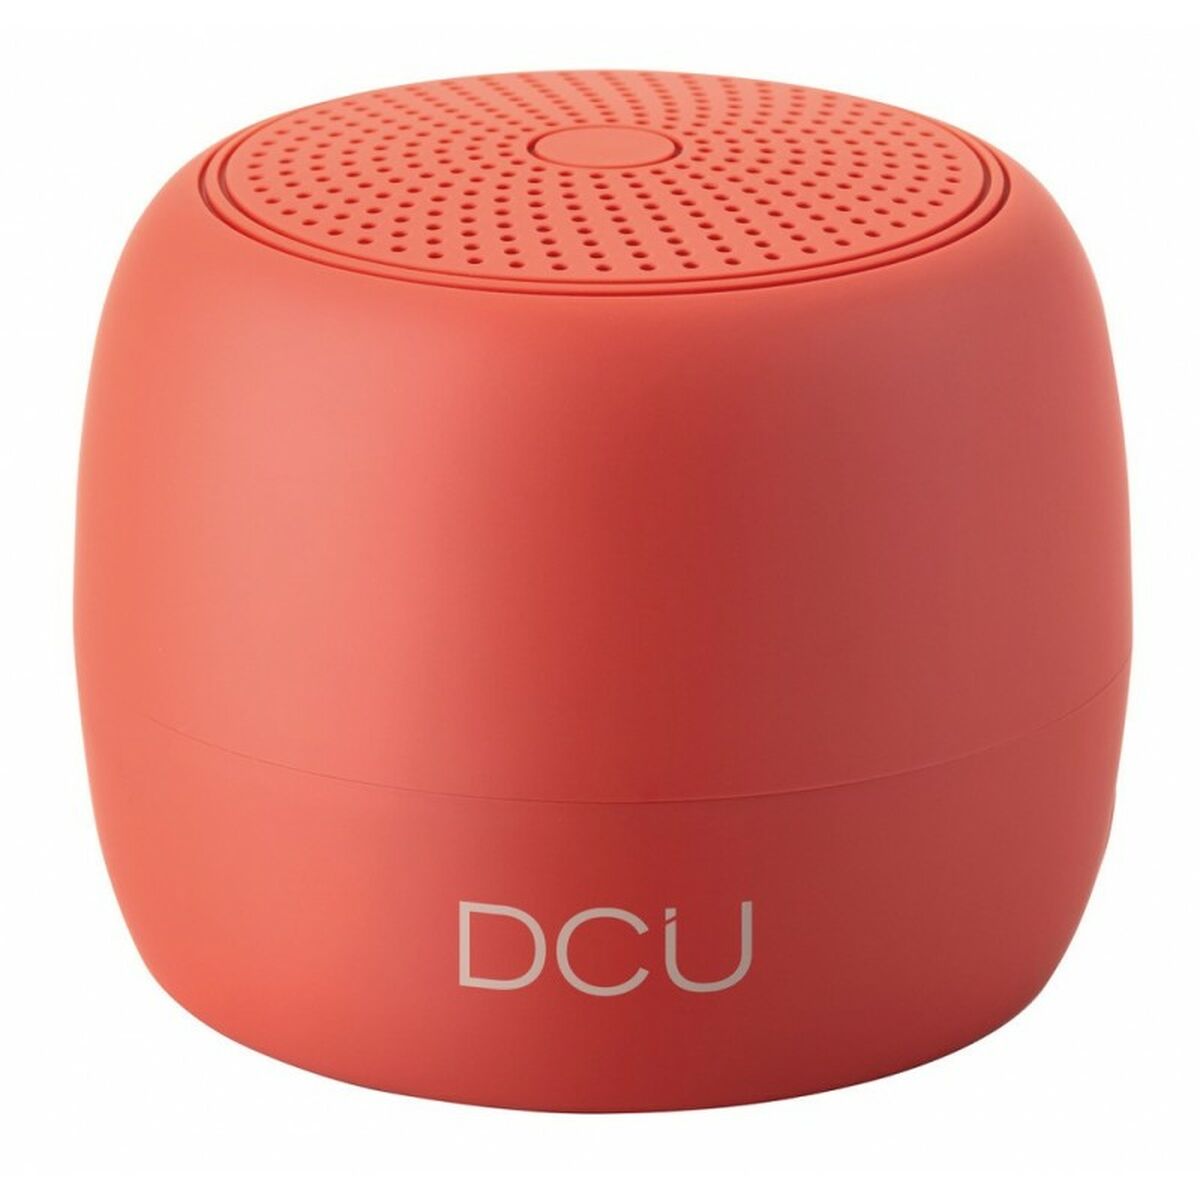 Portable Bluetooth Speakers DCU MINI, DCU Tecnologic, Electronics, Mobile communication and accessories, portable-bluetooth-speakers-dcu-mini-1, Brand_DCU Tecnologic, category-reference-2609, category-reference-2882, category-reference-2923, category-reference-t-19653, category-reference-t-21311, category-reference-t-25527, category-reference-t-4036, category-reference-t-4037, Condition_NEW, entertainment, music, Price_20 - 50, telephones & tablets, wifi y bluetooth, RiotNook